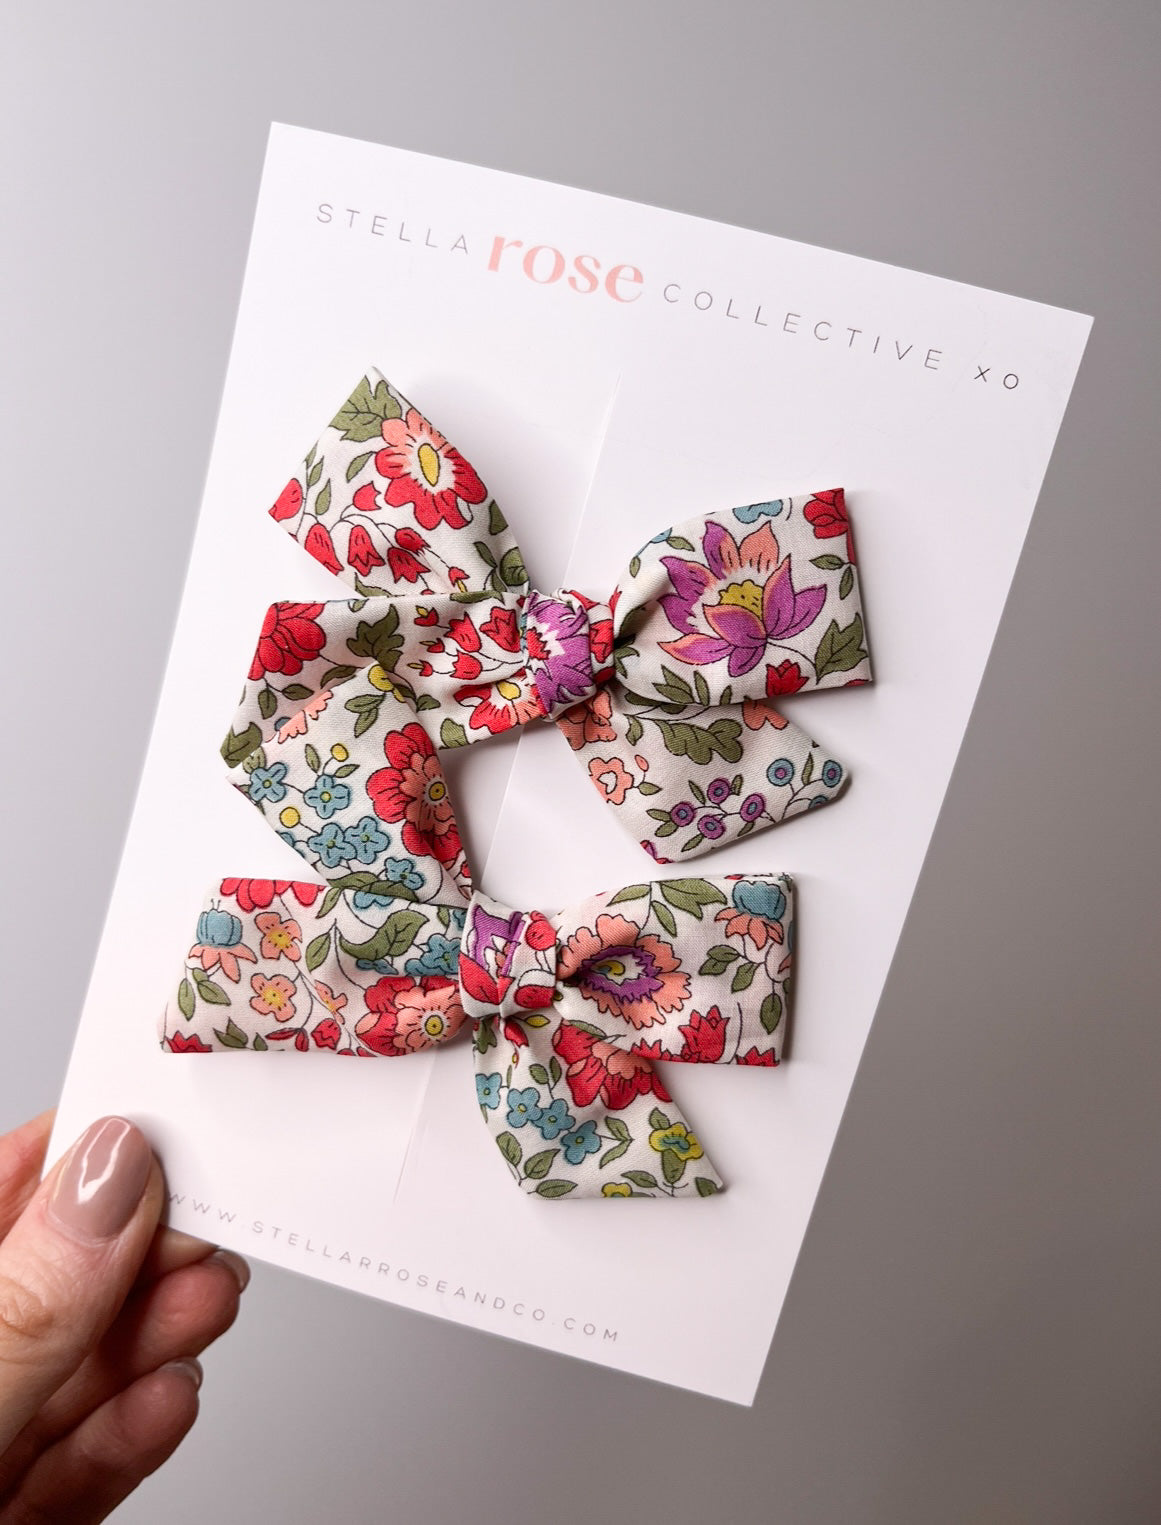 Stella Rose & Co | 2 Pack Bow Clips